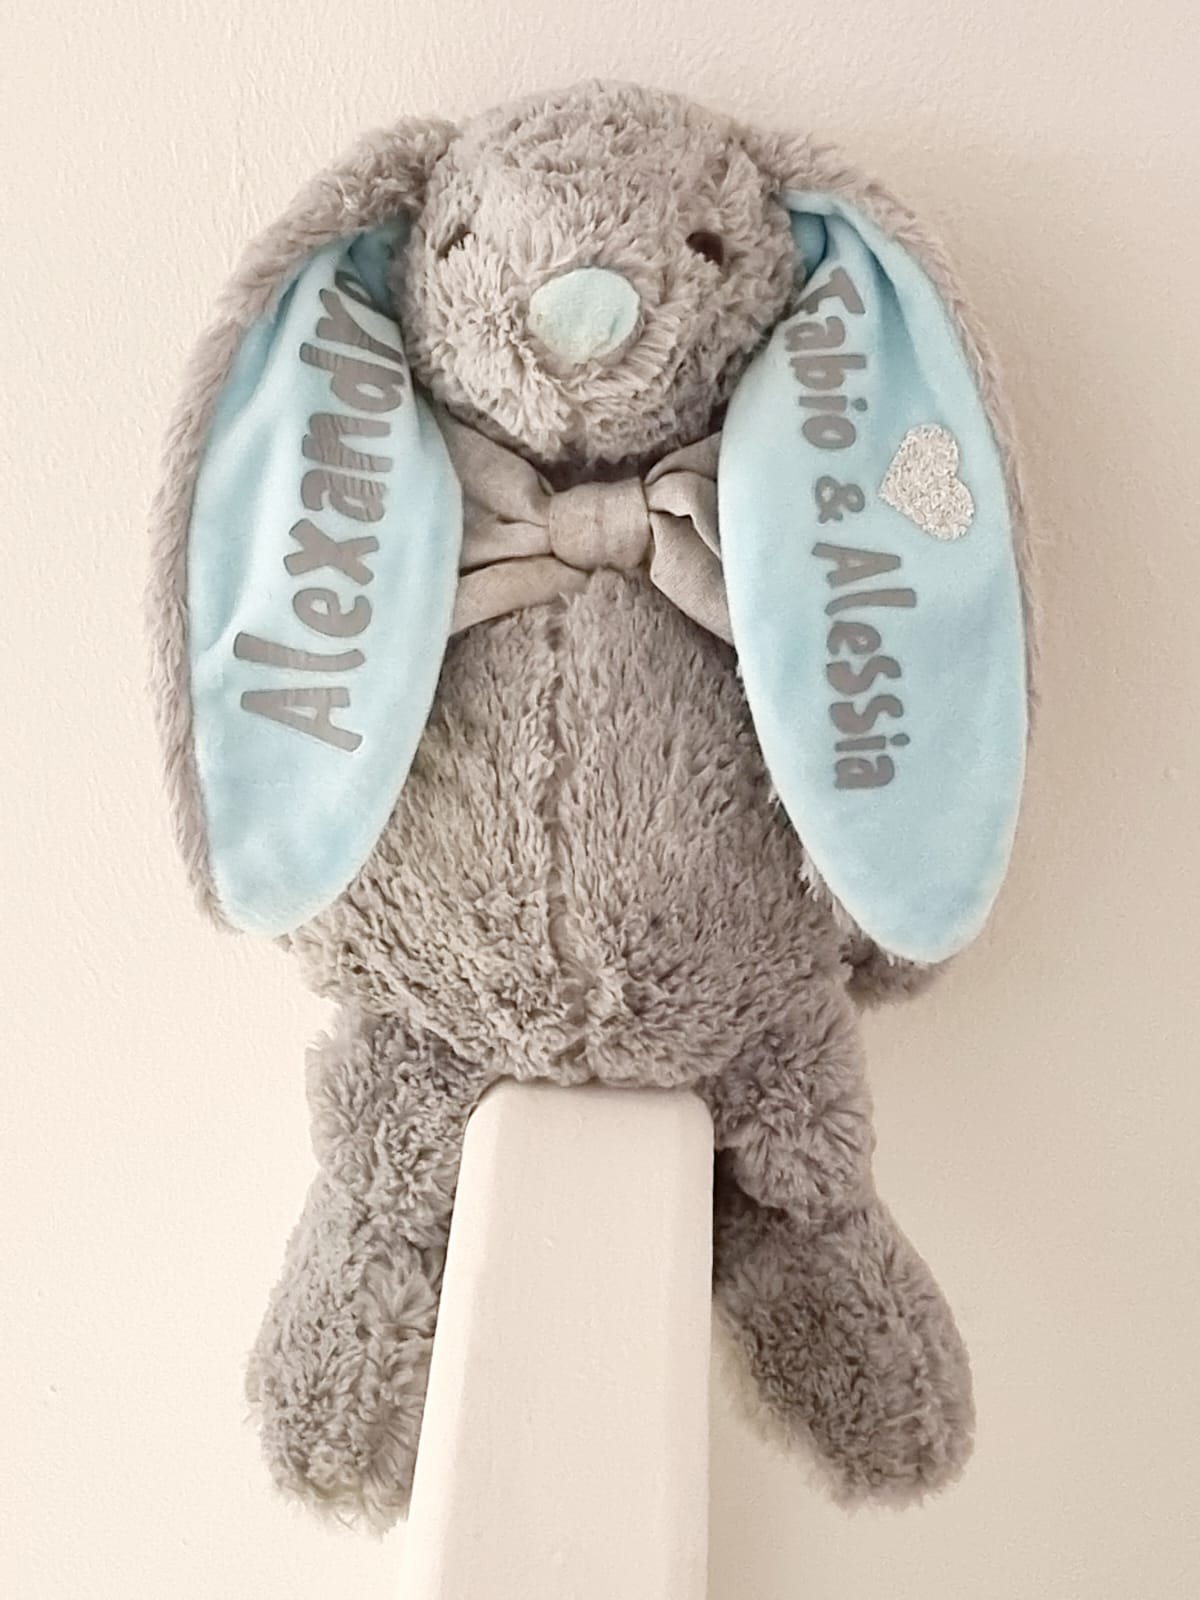 Plush animals with name and birth date